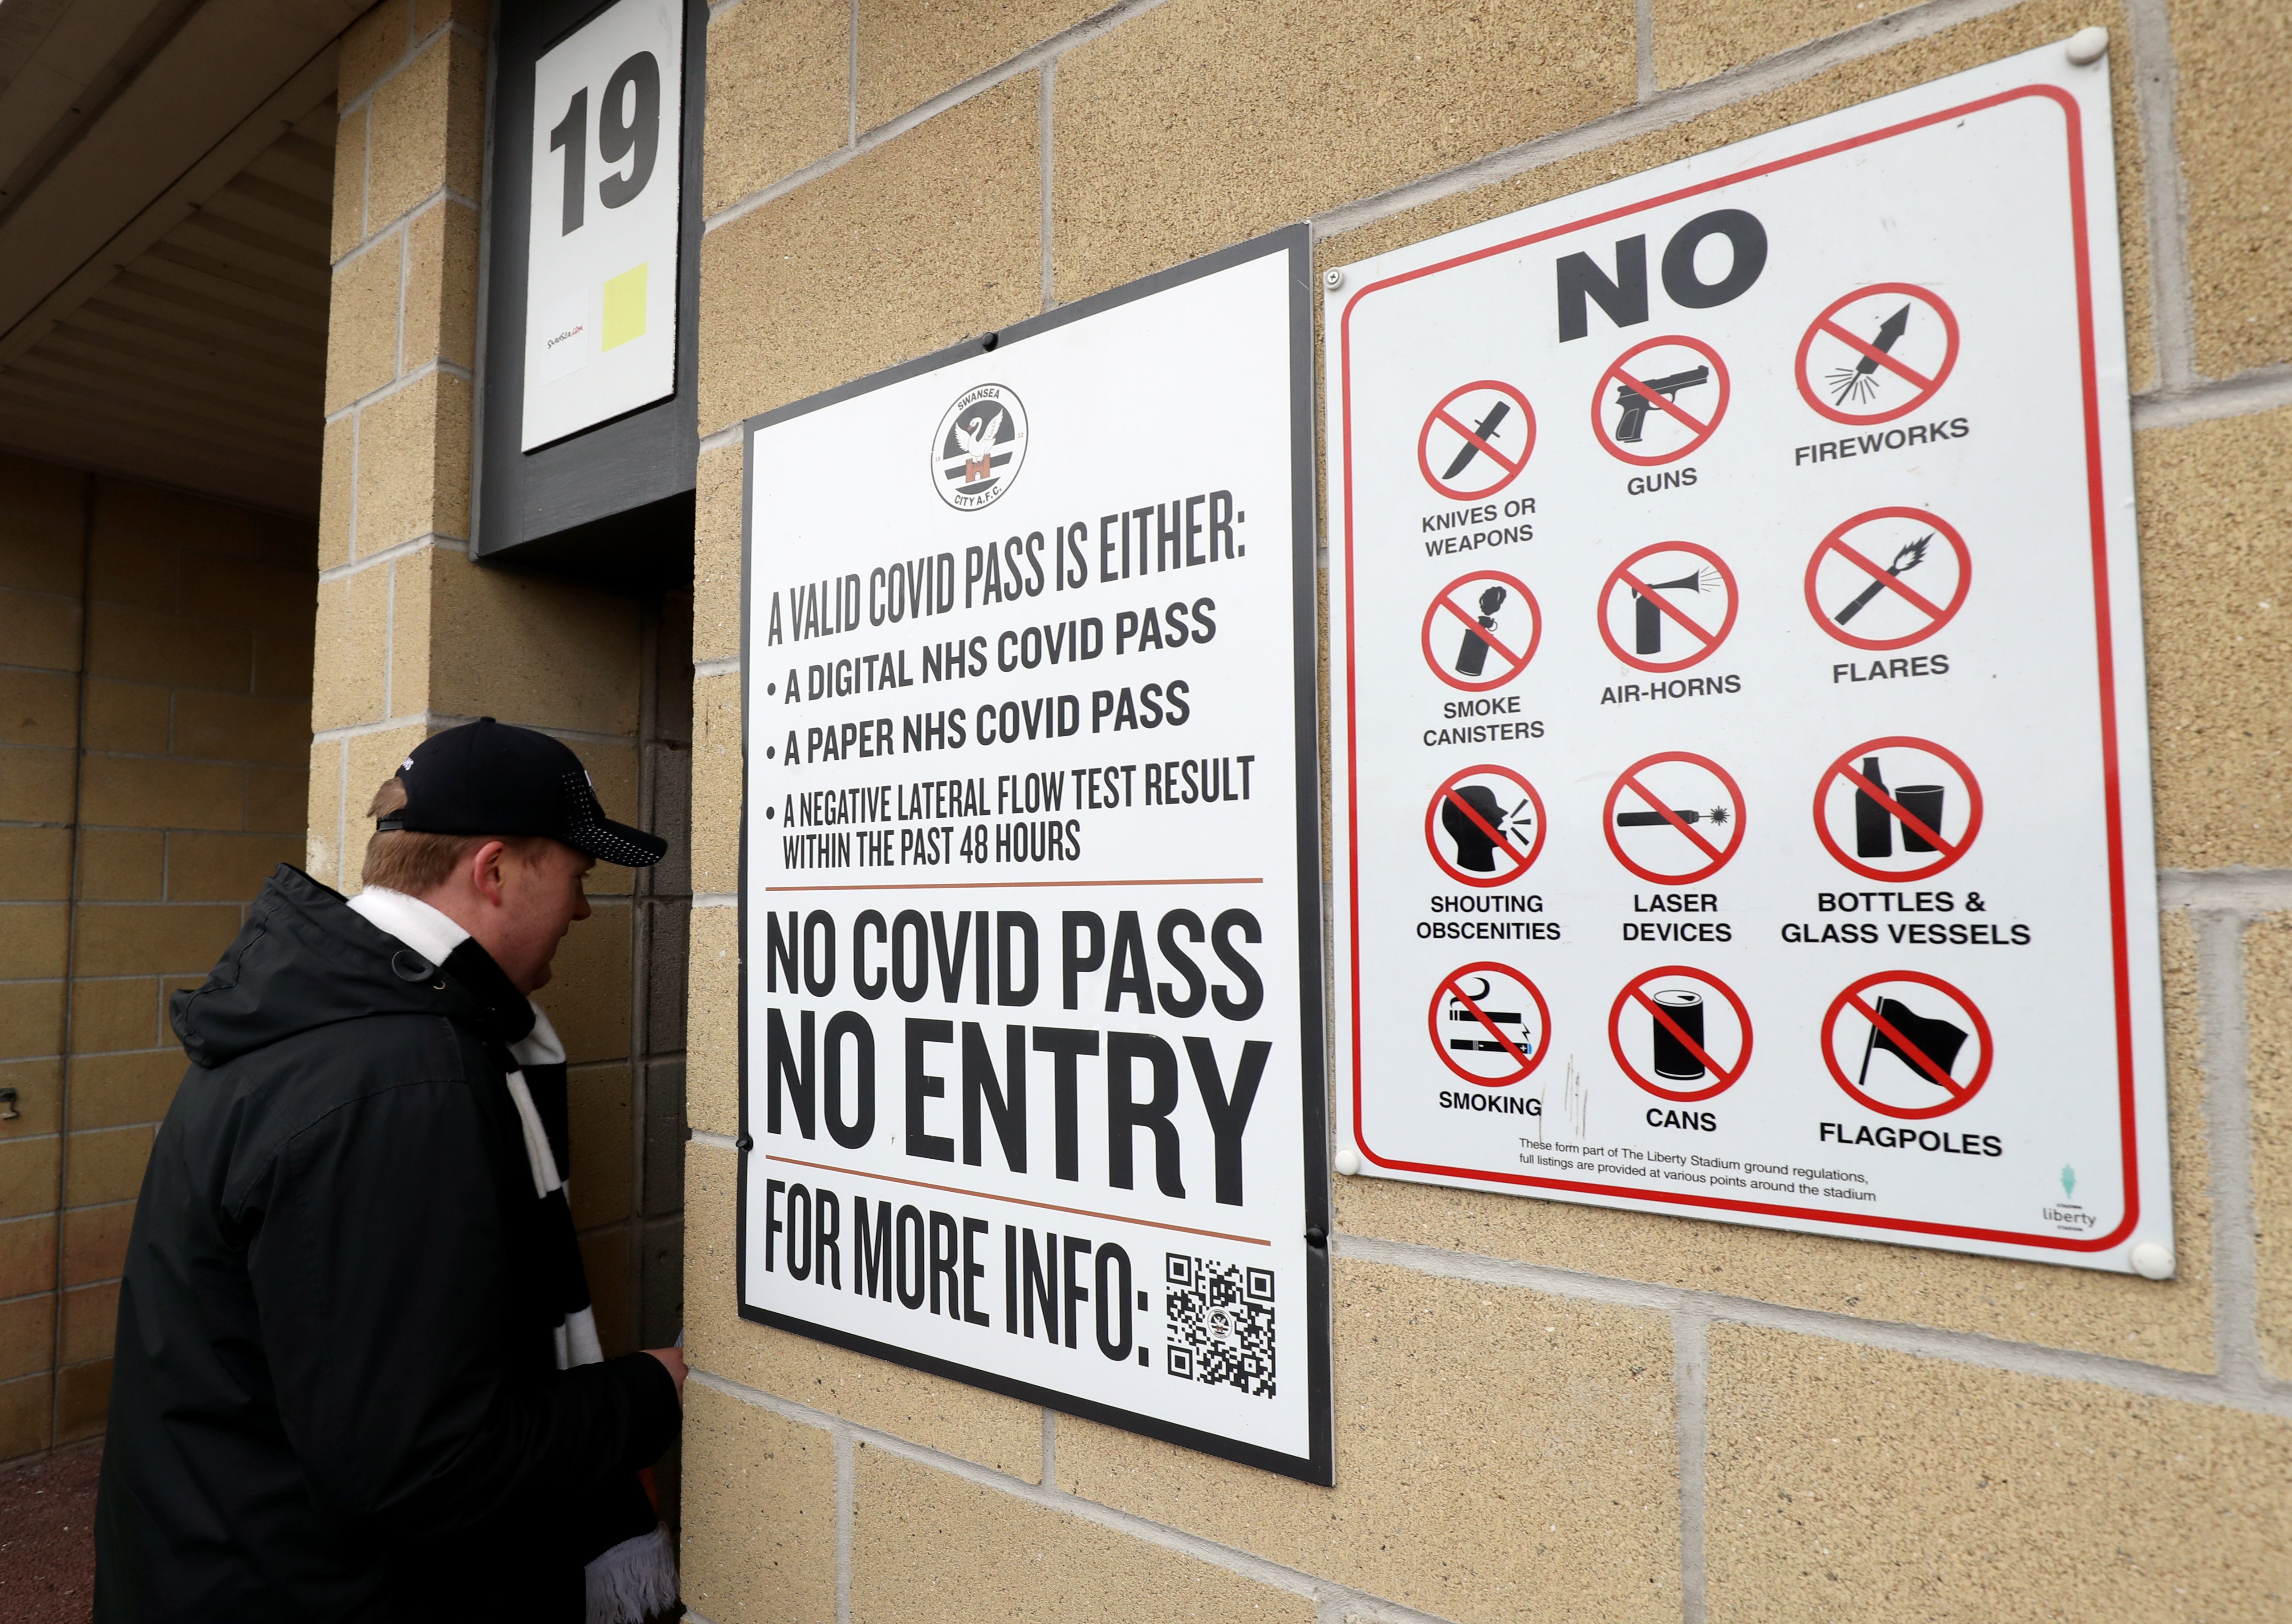 A Swansea City fan enters the team’s stadium next to a notice about requirements for a Covid pass (Bradley Collyer/PA)